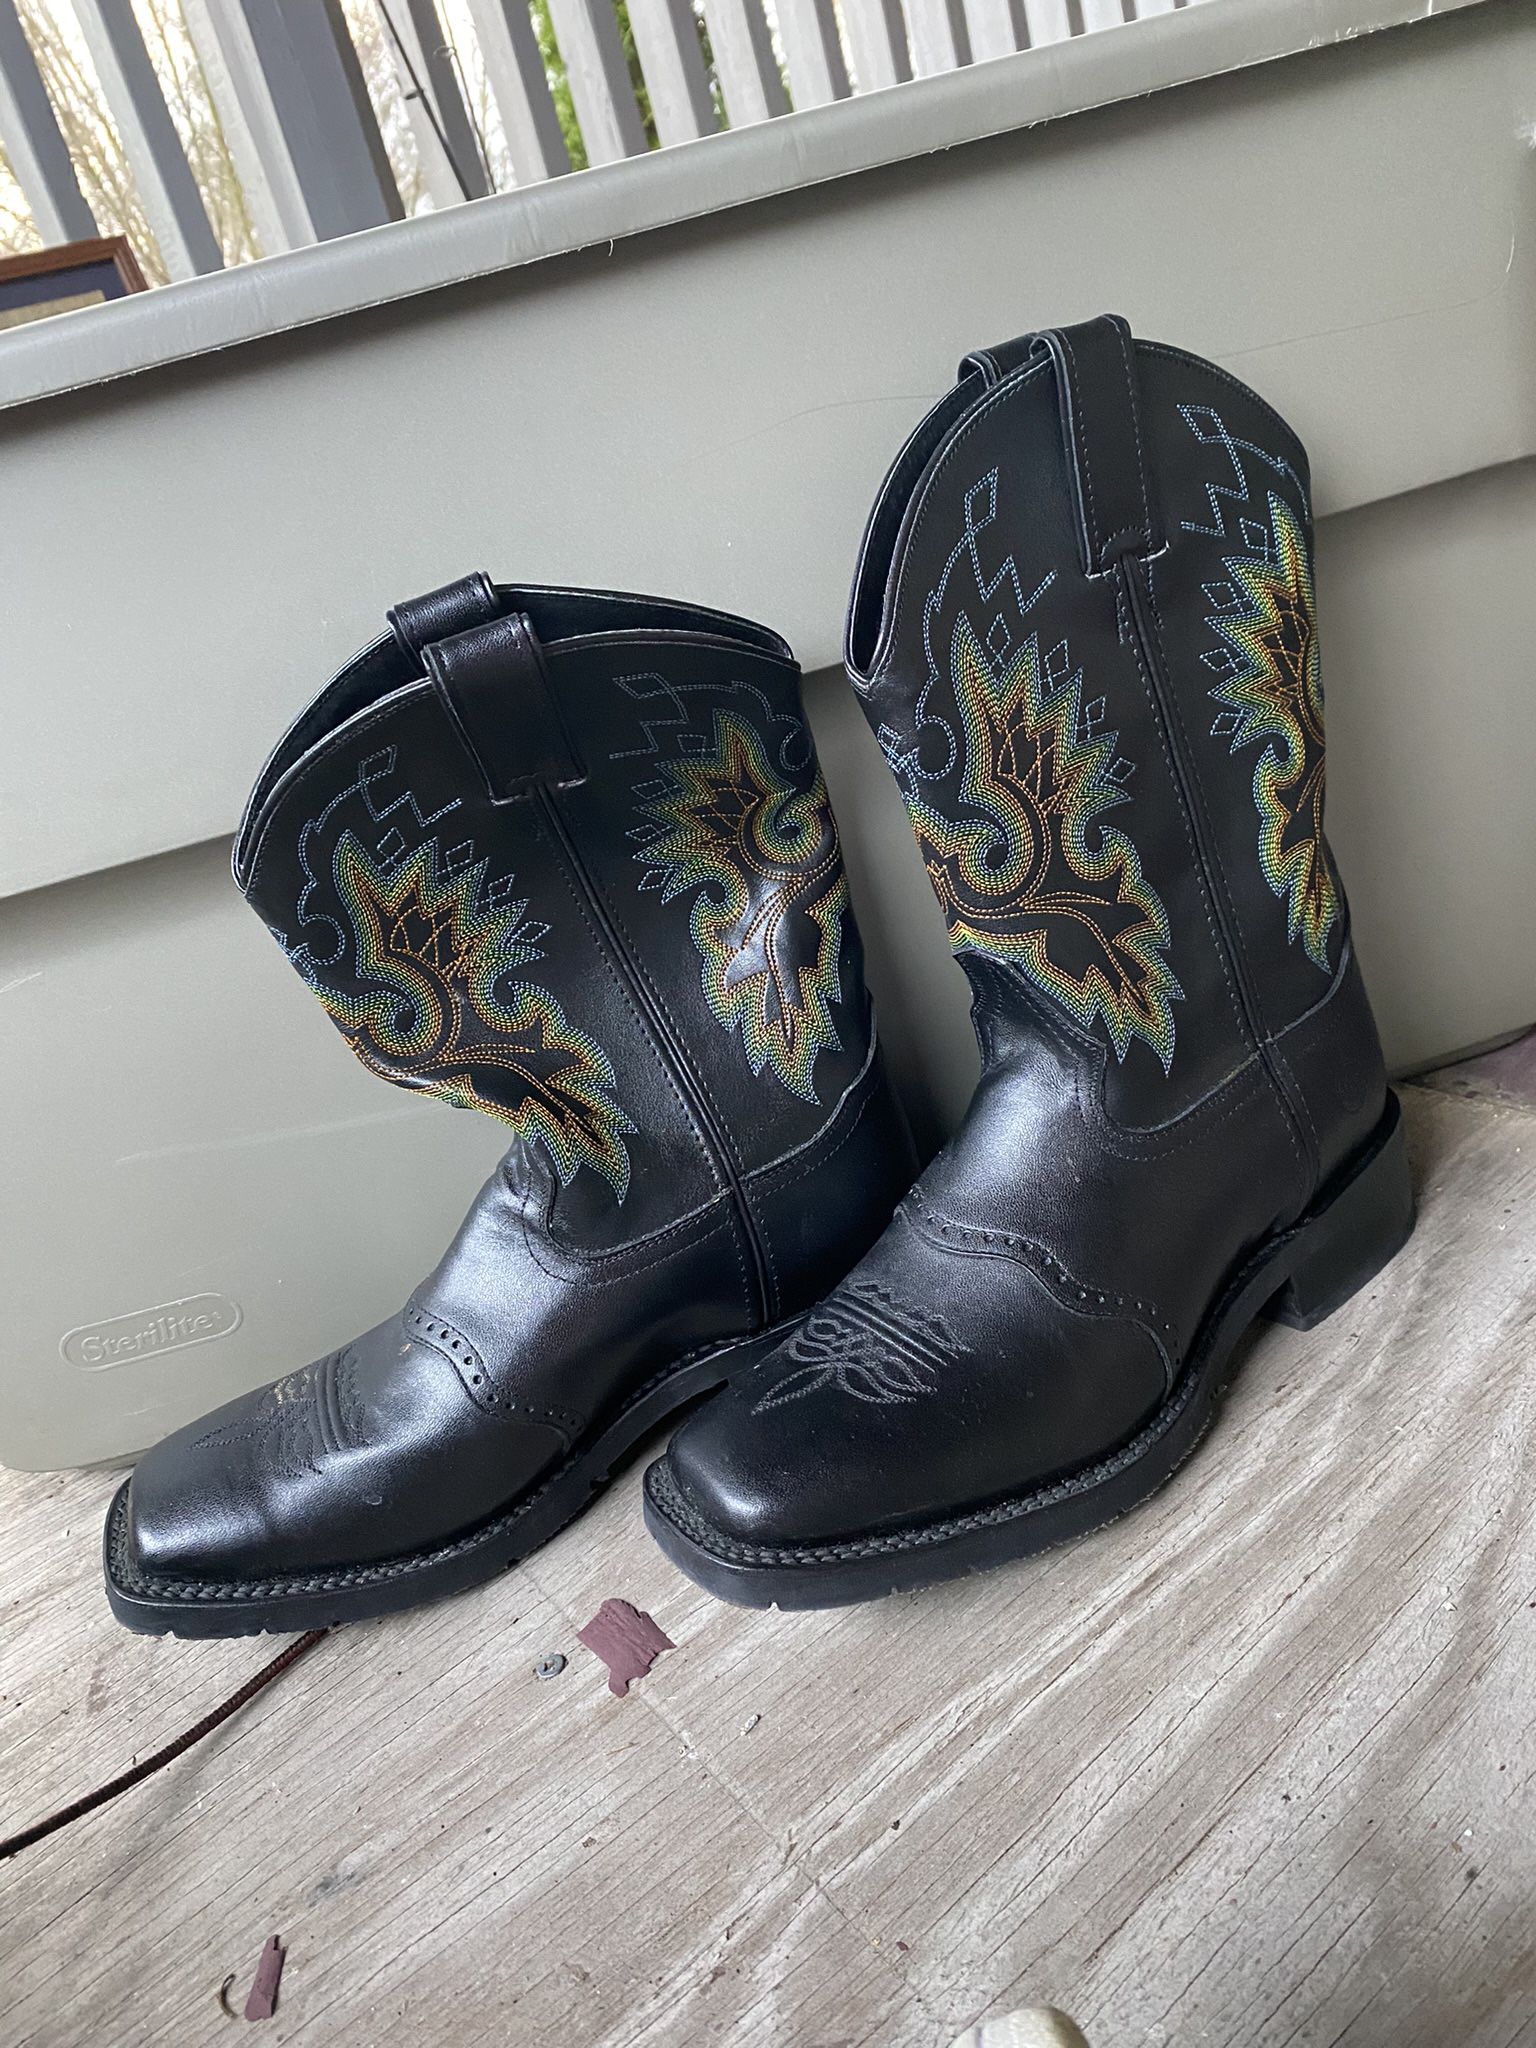 Size 9 Boots (Various Brands Including Double 